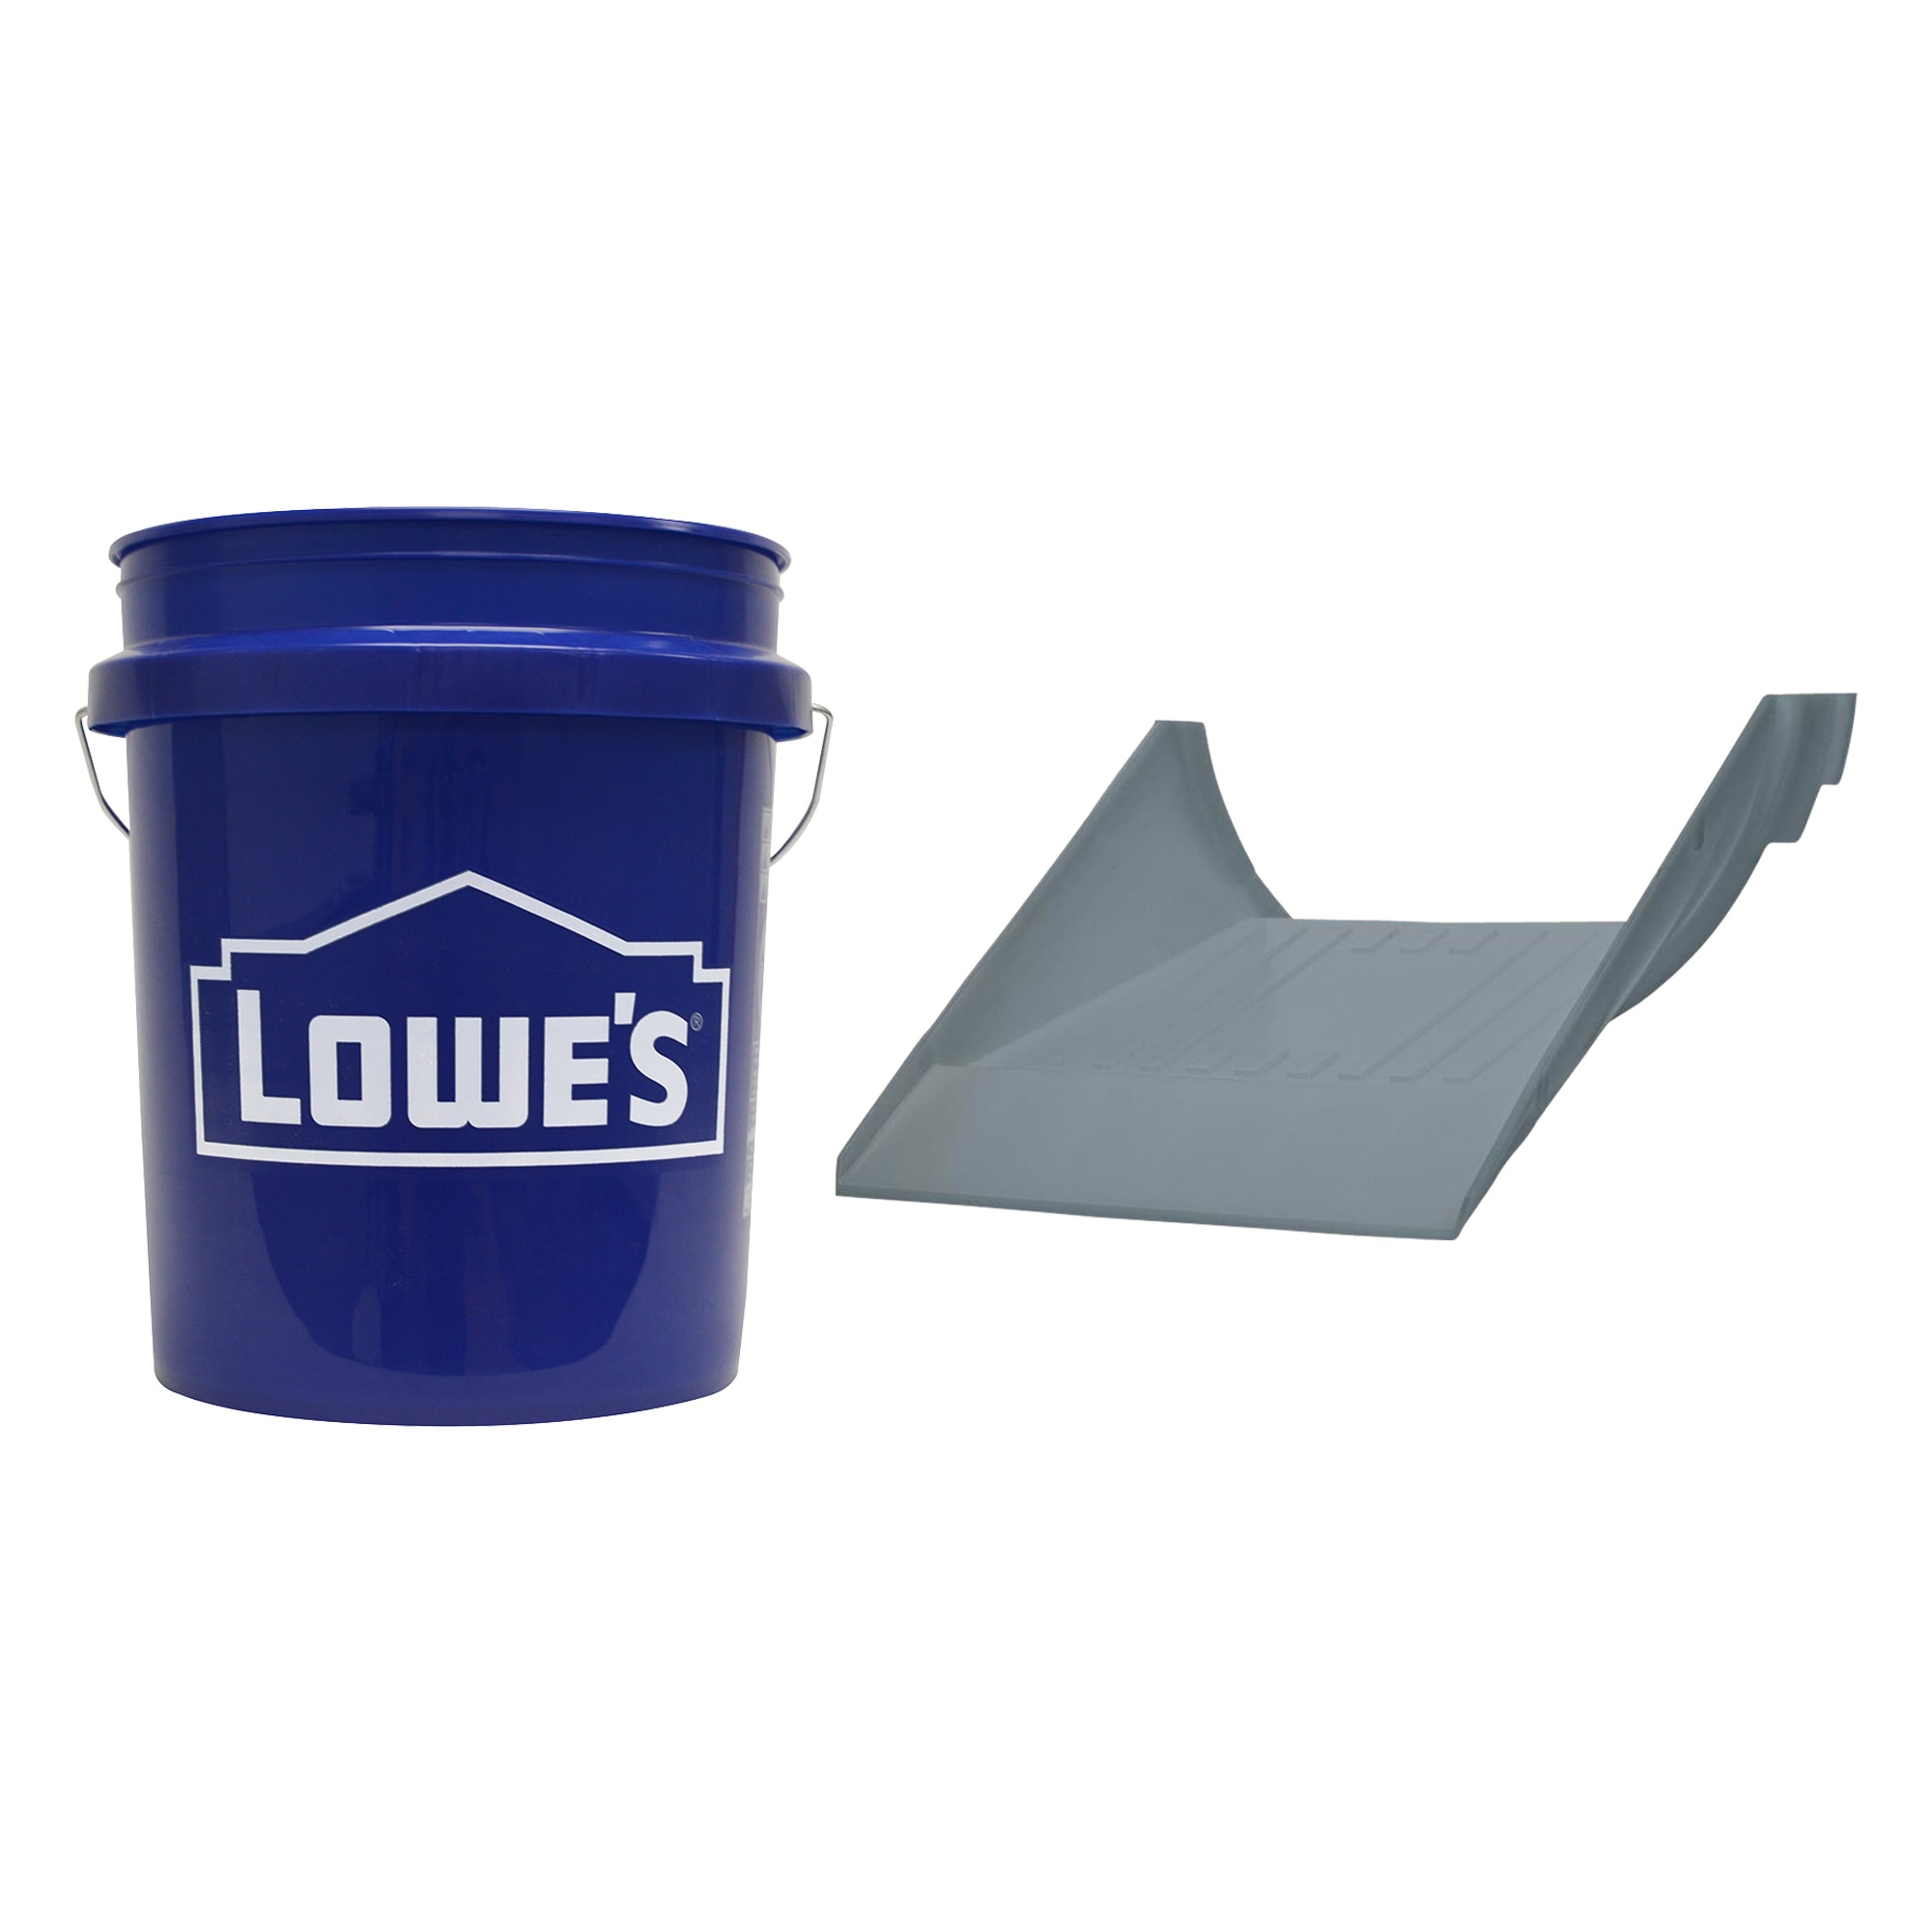 DANCO Attachable Dust Pan for 5 gal. Bucket 11033X - The Home Depot